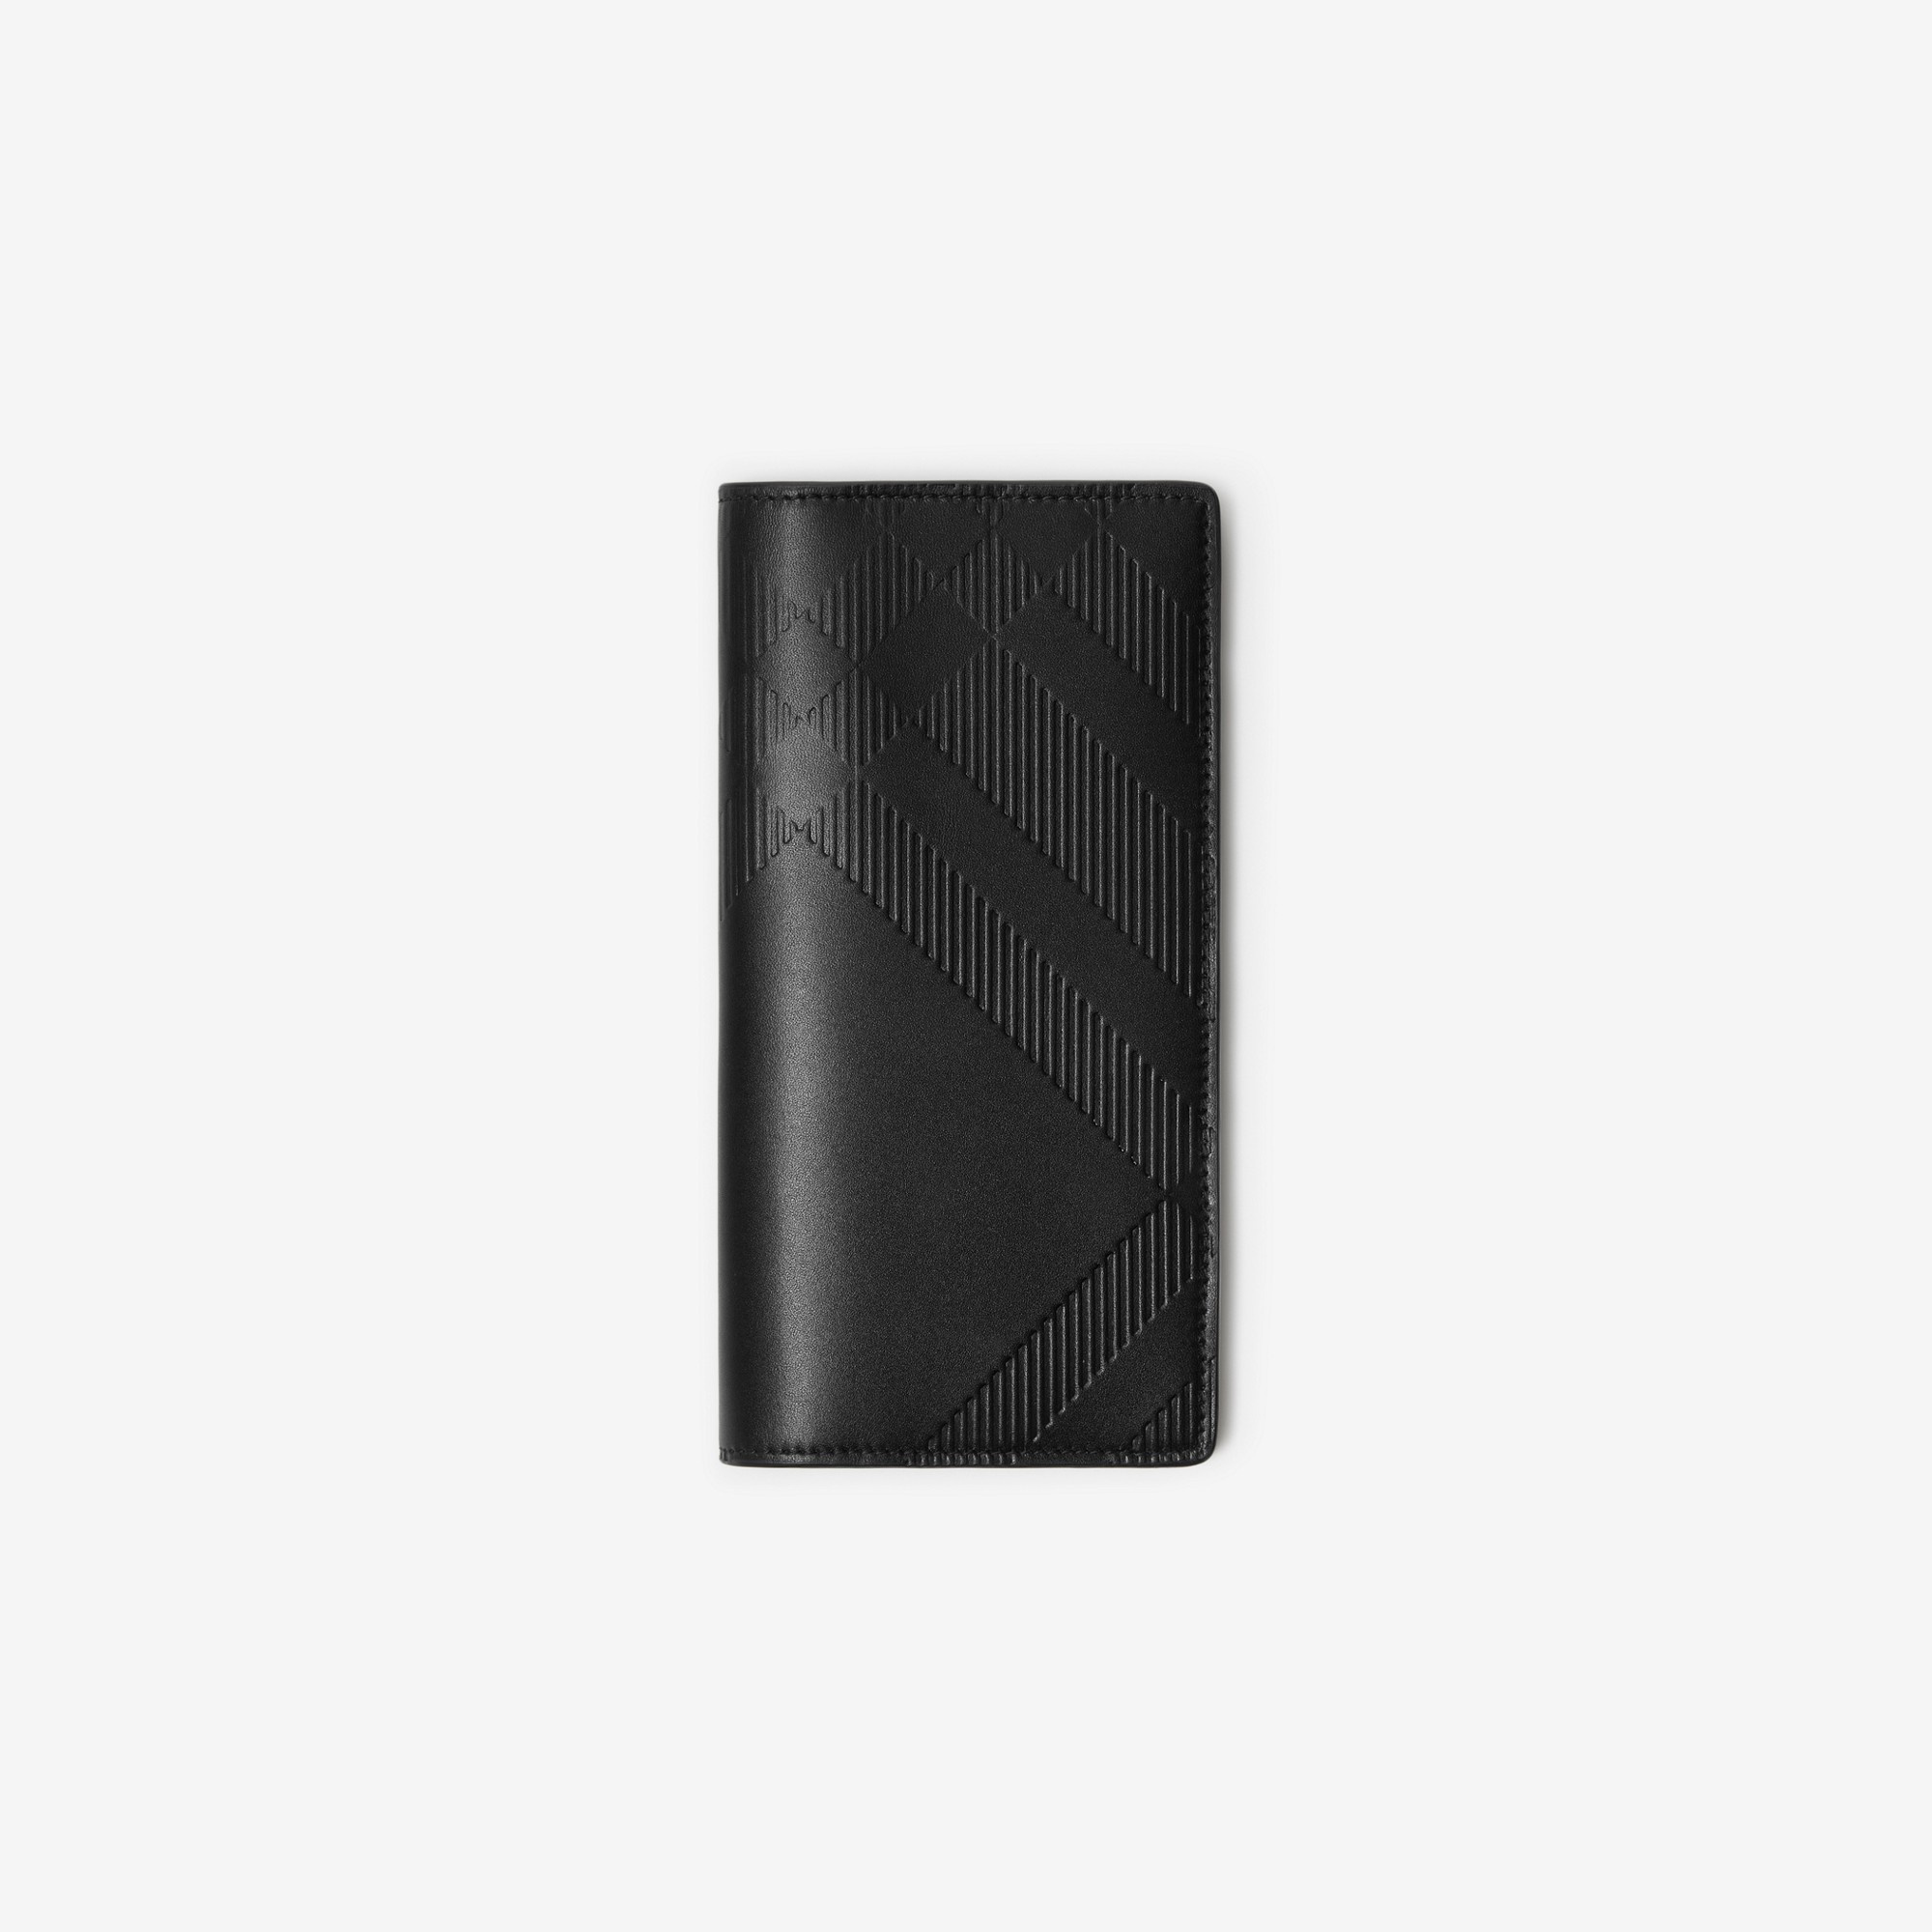 Burberry Check Leather Continental Wallet - Farfetch